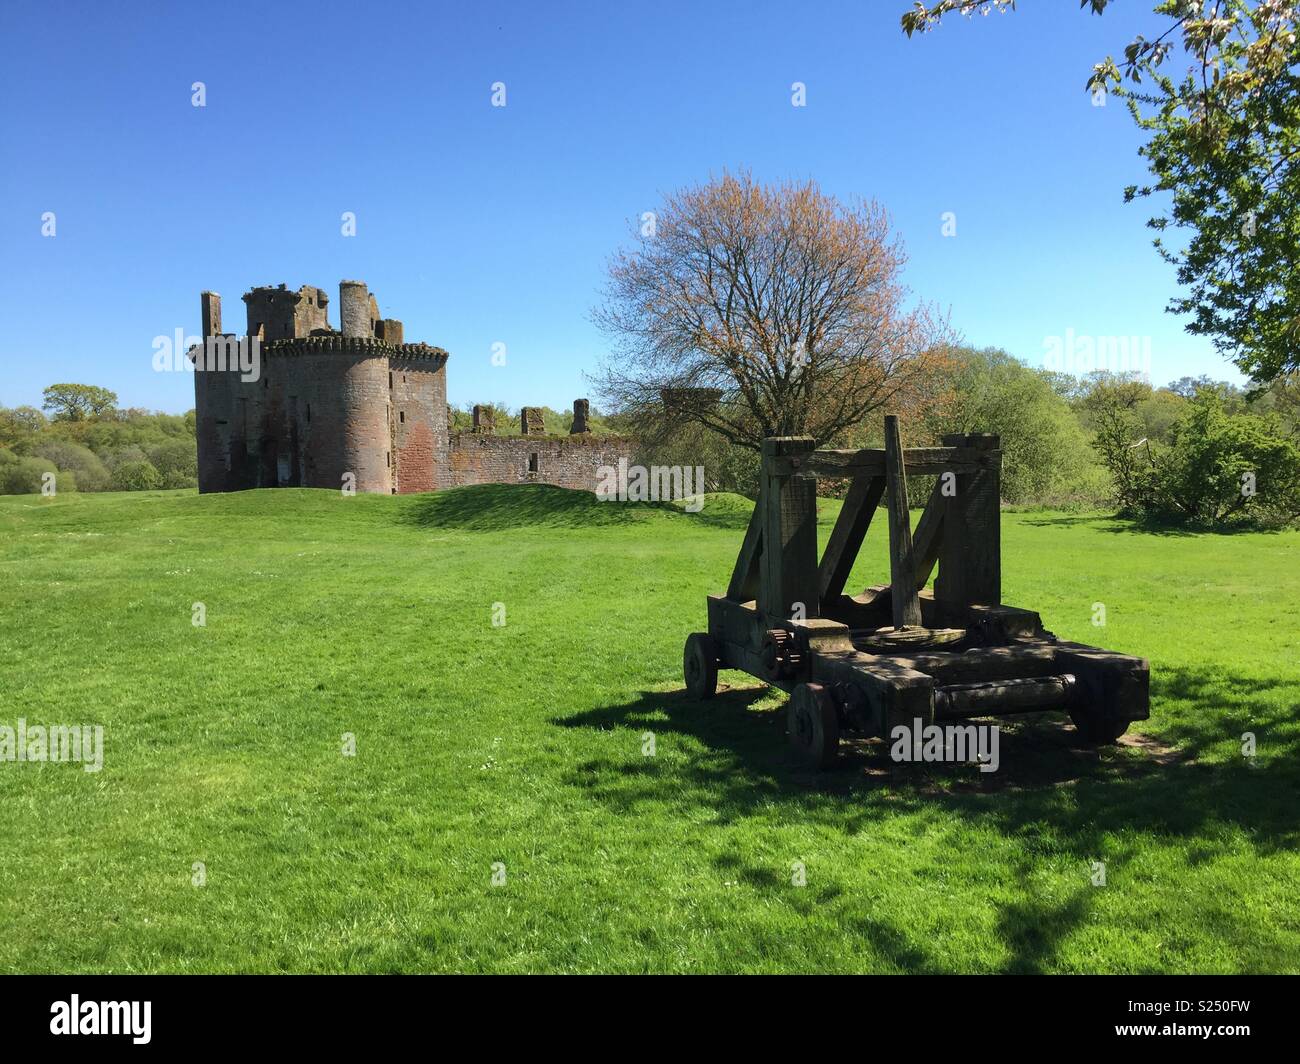 Castle and siege engine Stock Photo